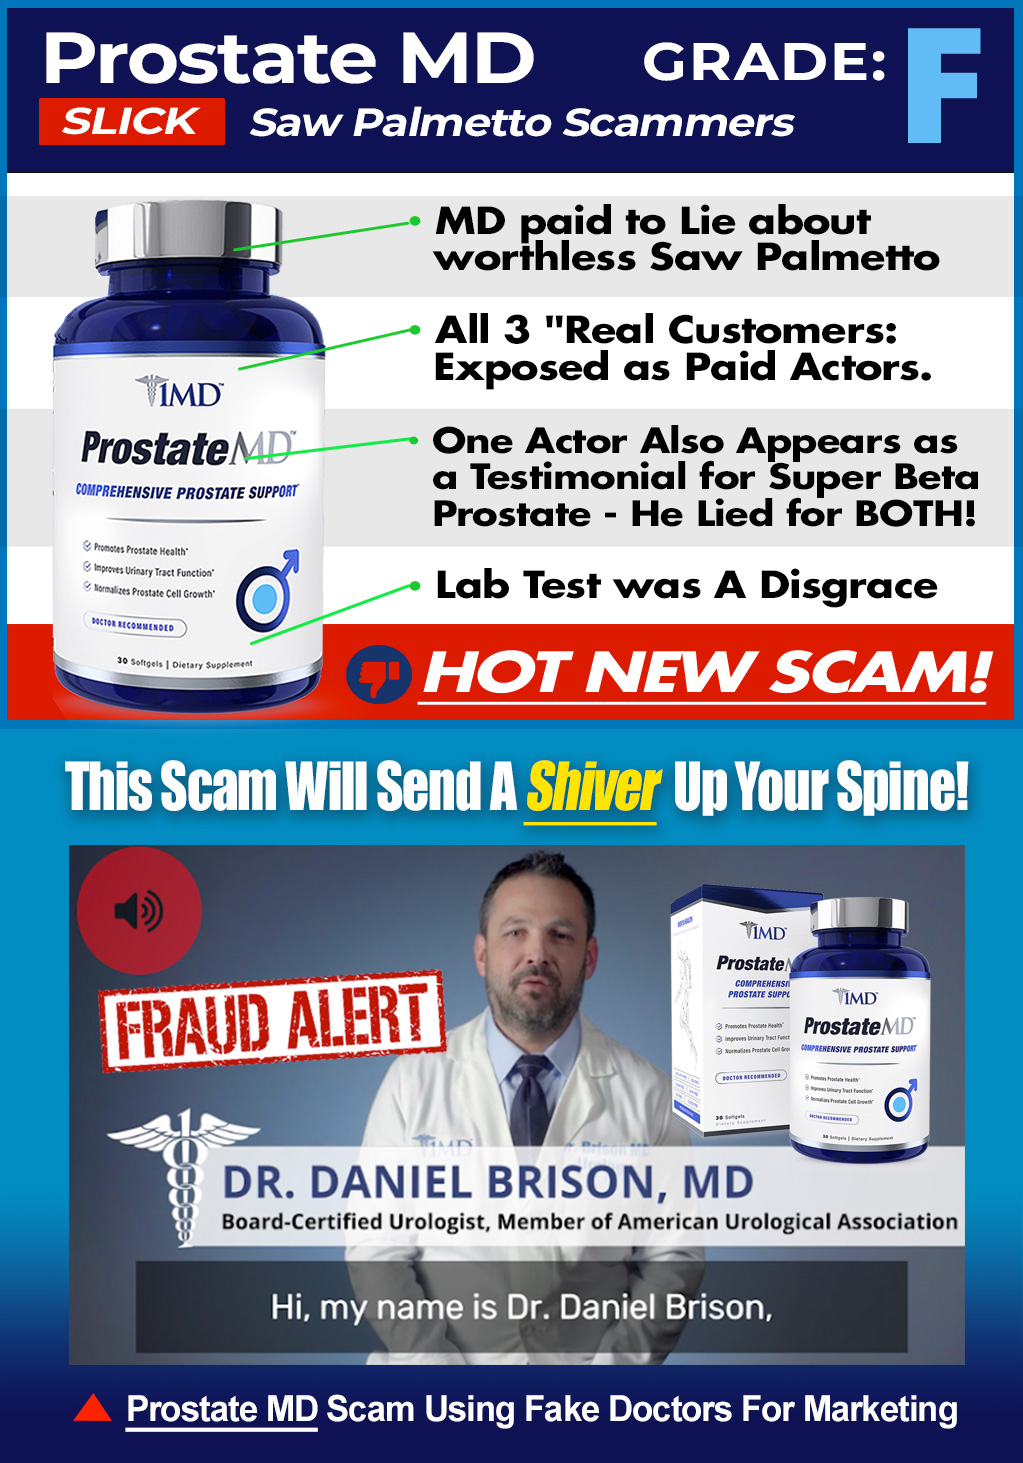 Prostate MD - product rating and information card